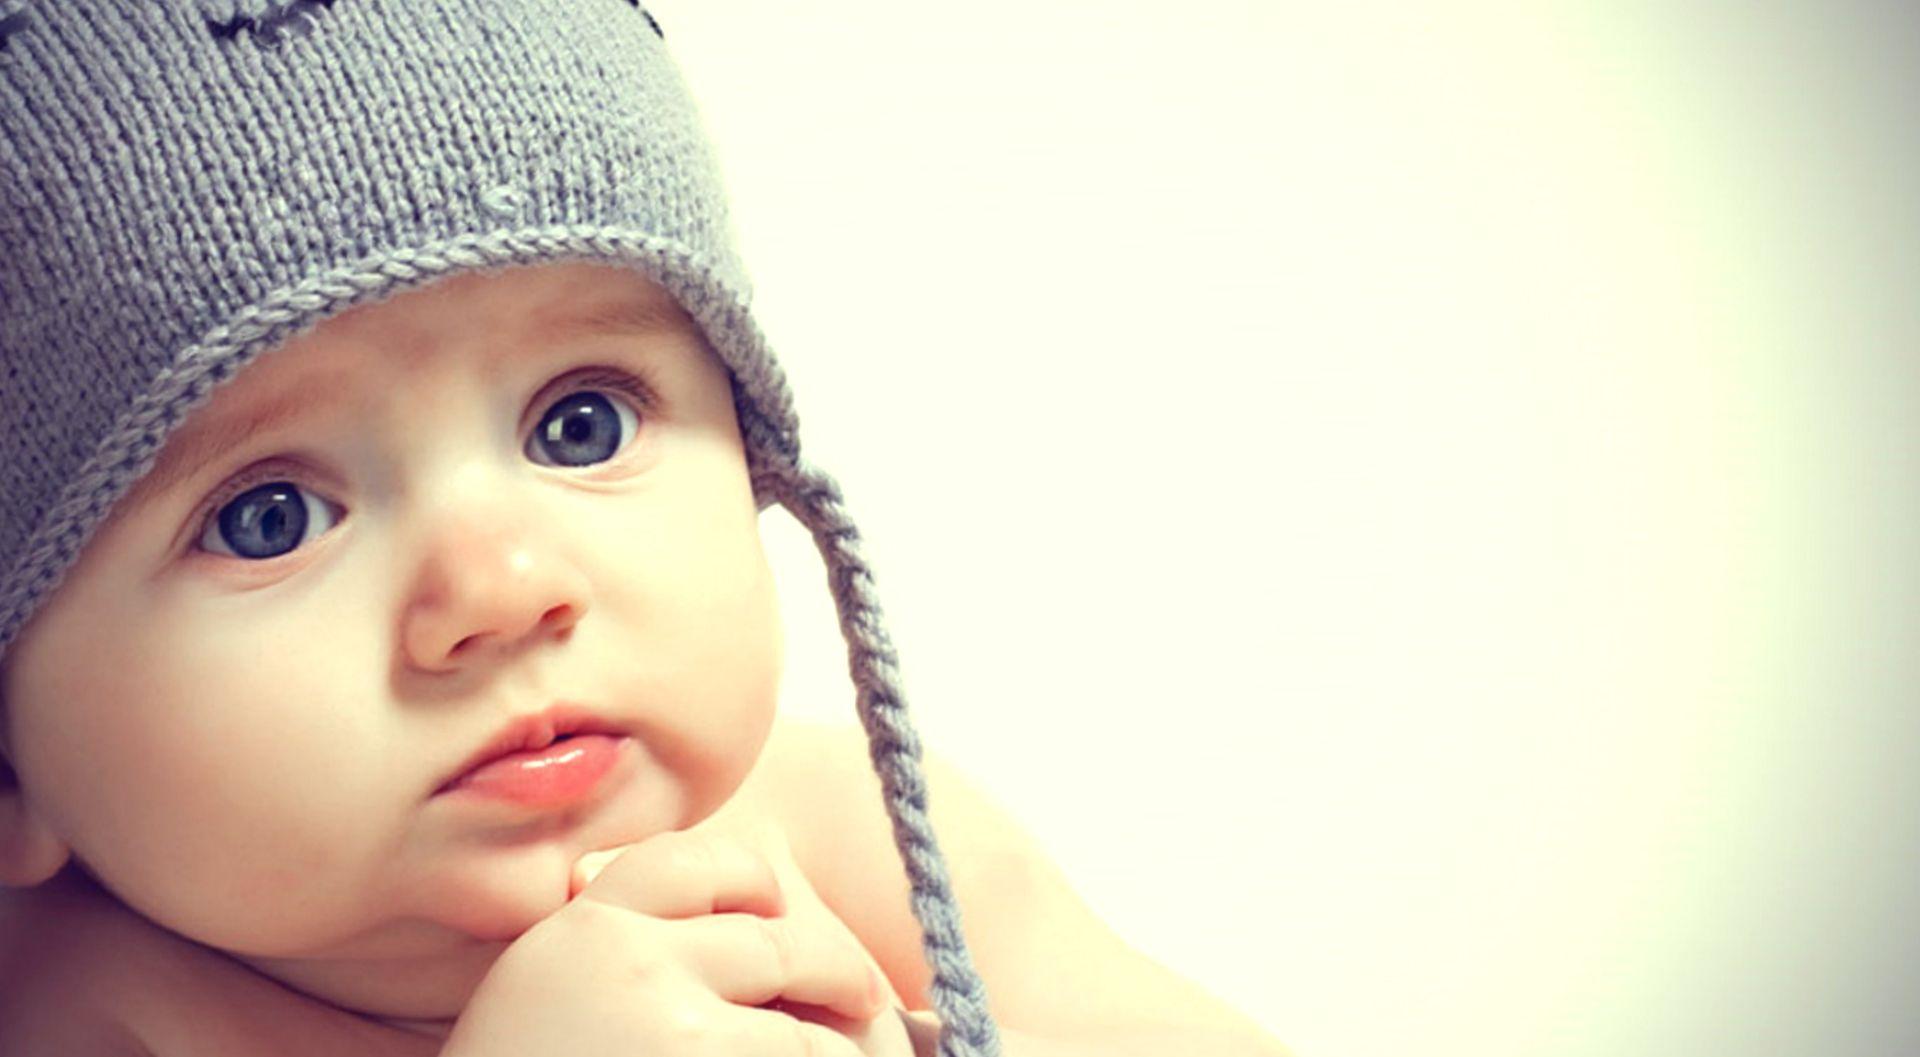 Baby Wallpapers HD - Wallpaper Cave